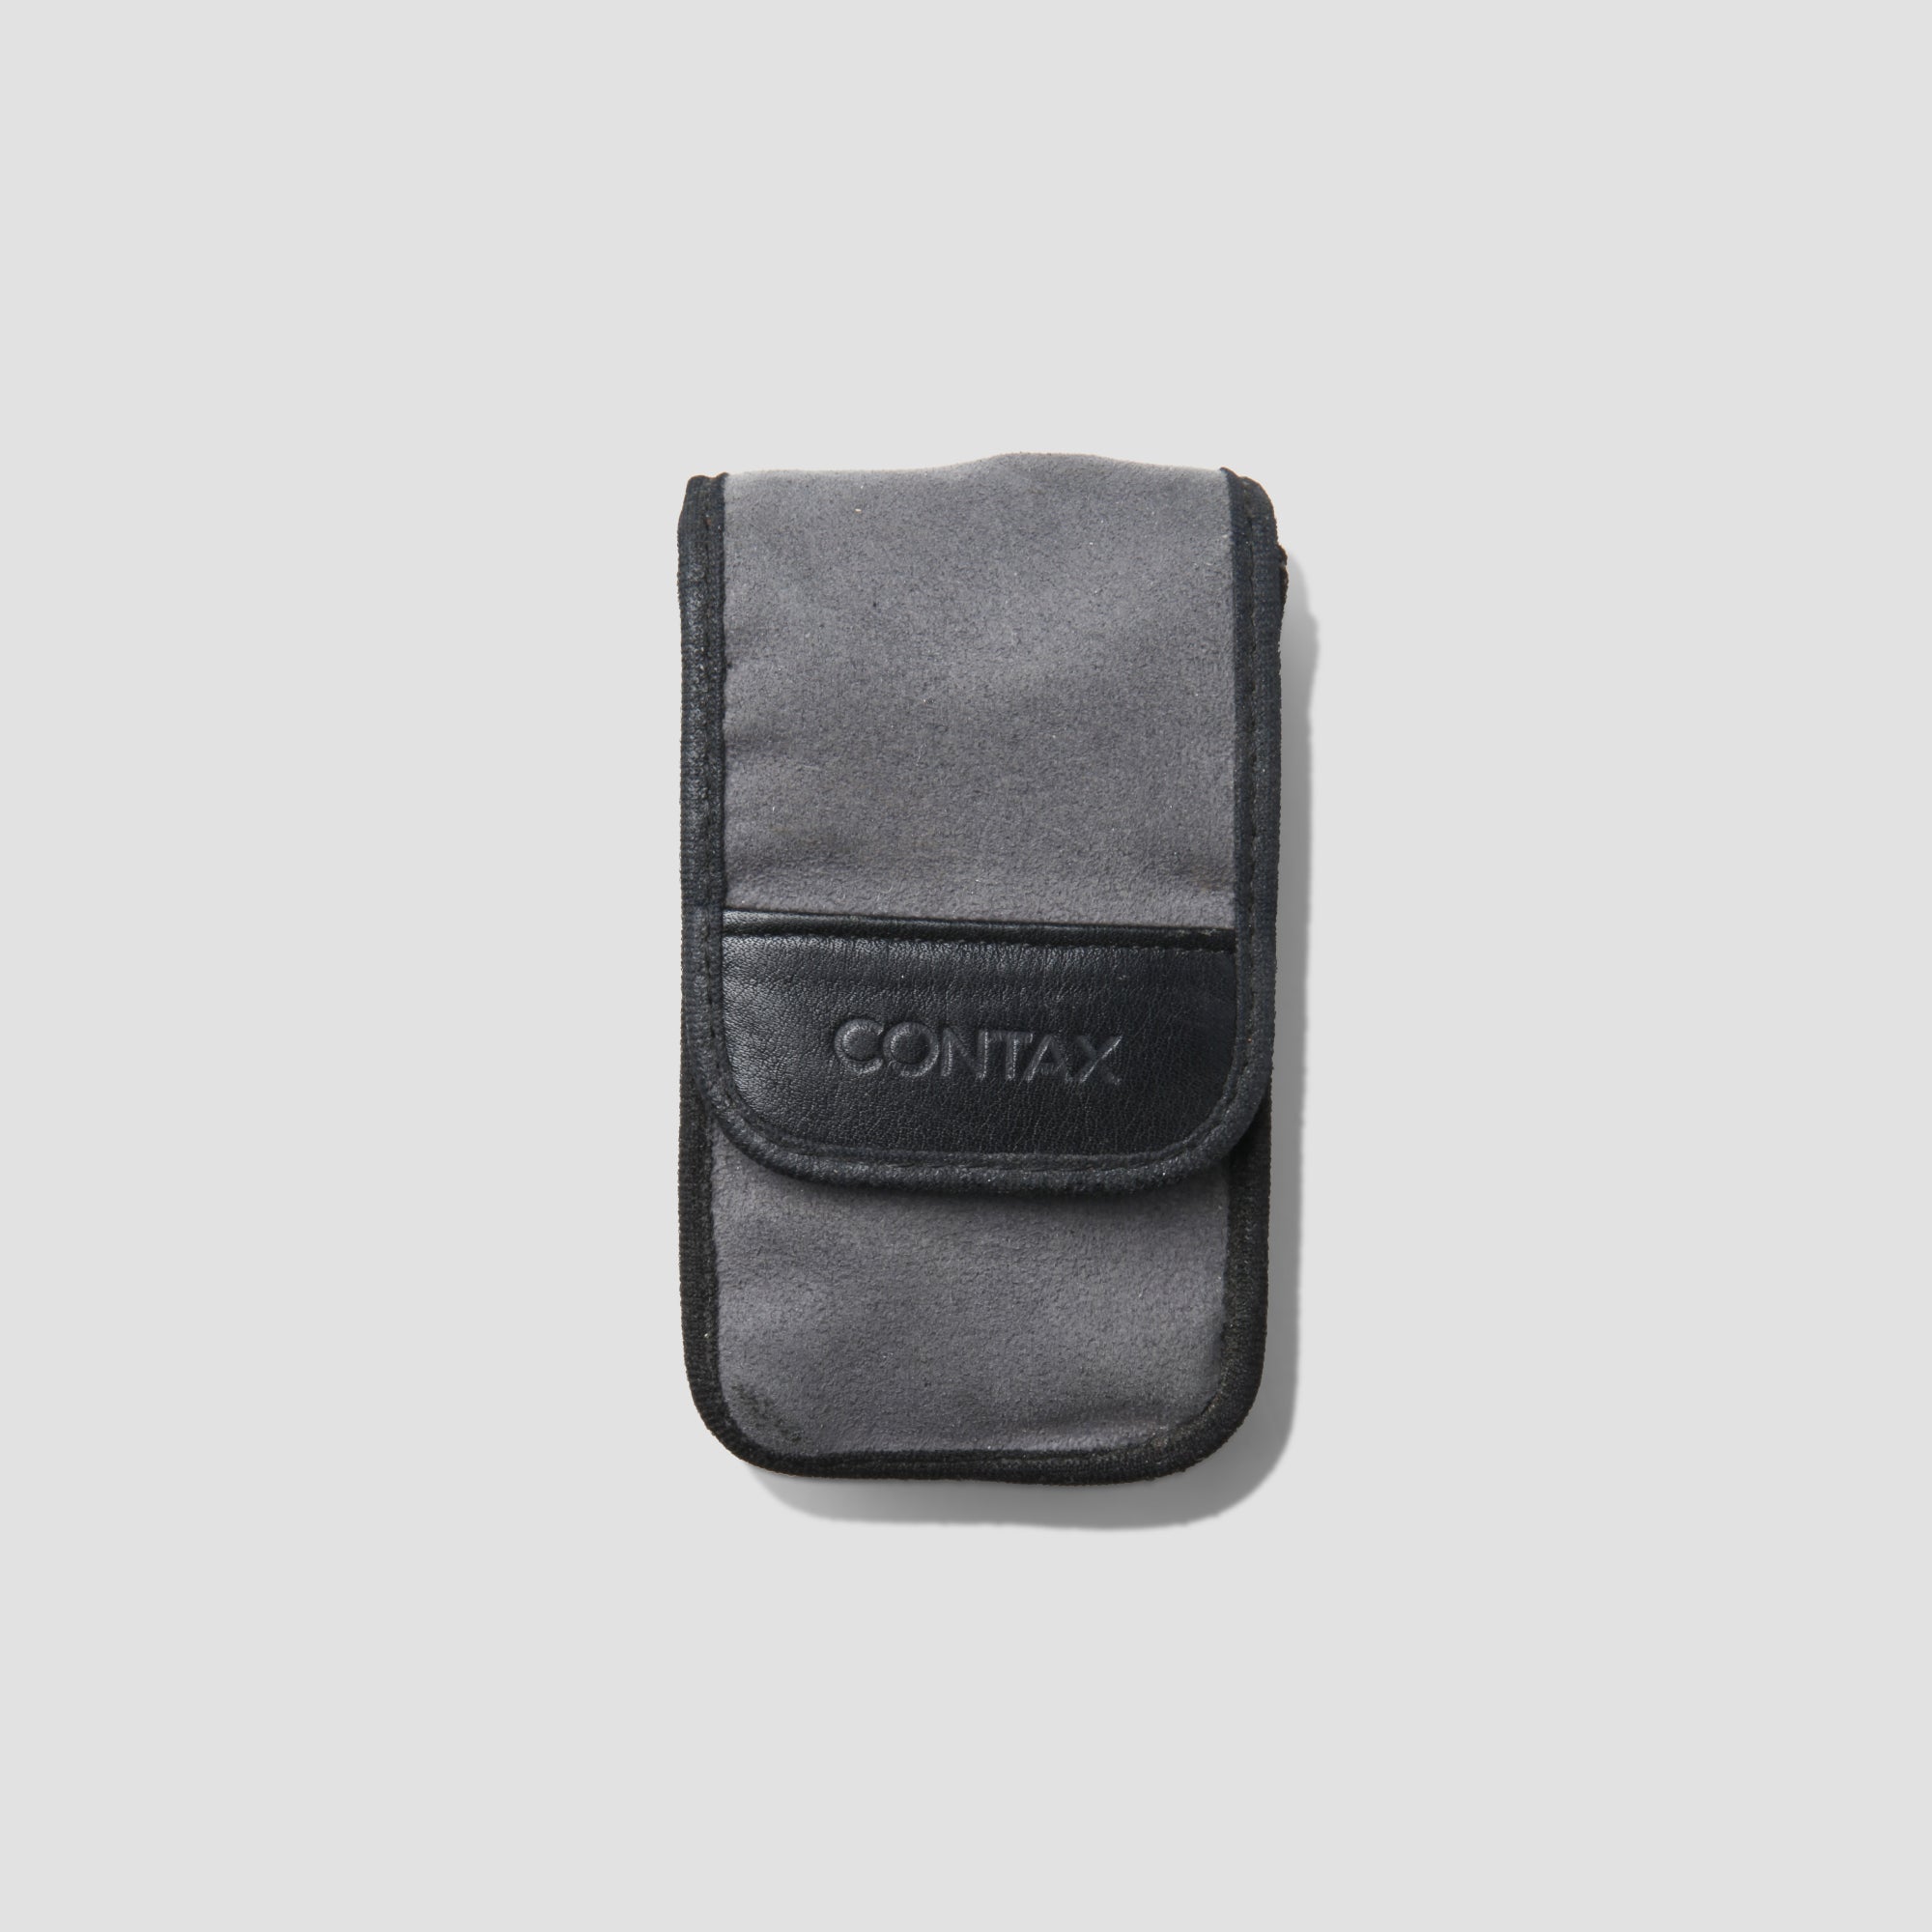 Buy Contax T bag now at Analogue Amsterdam